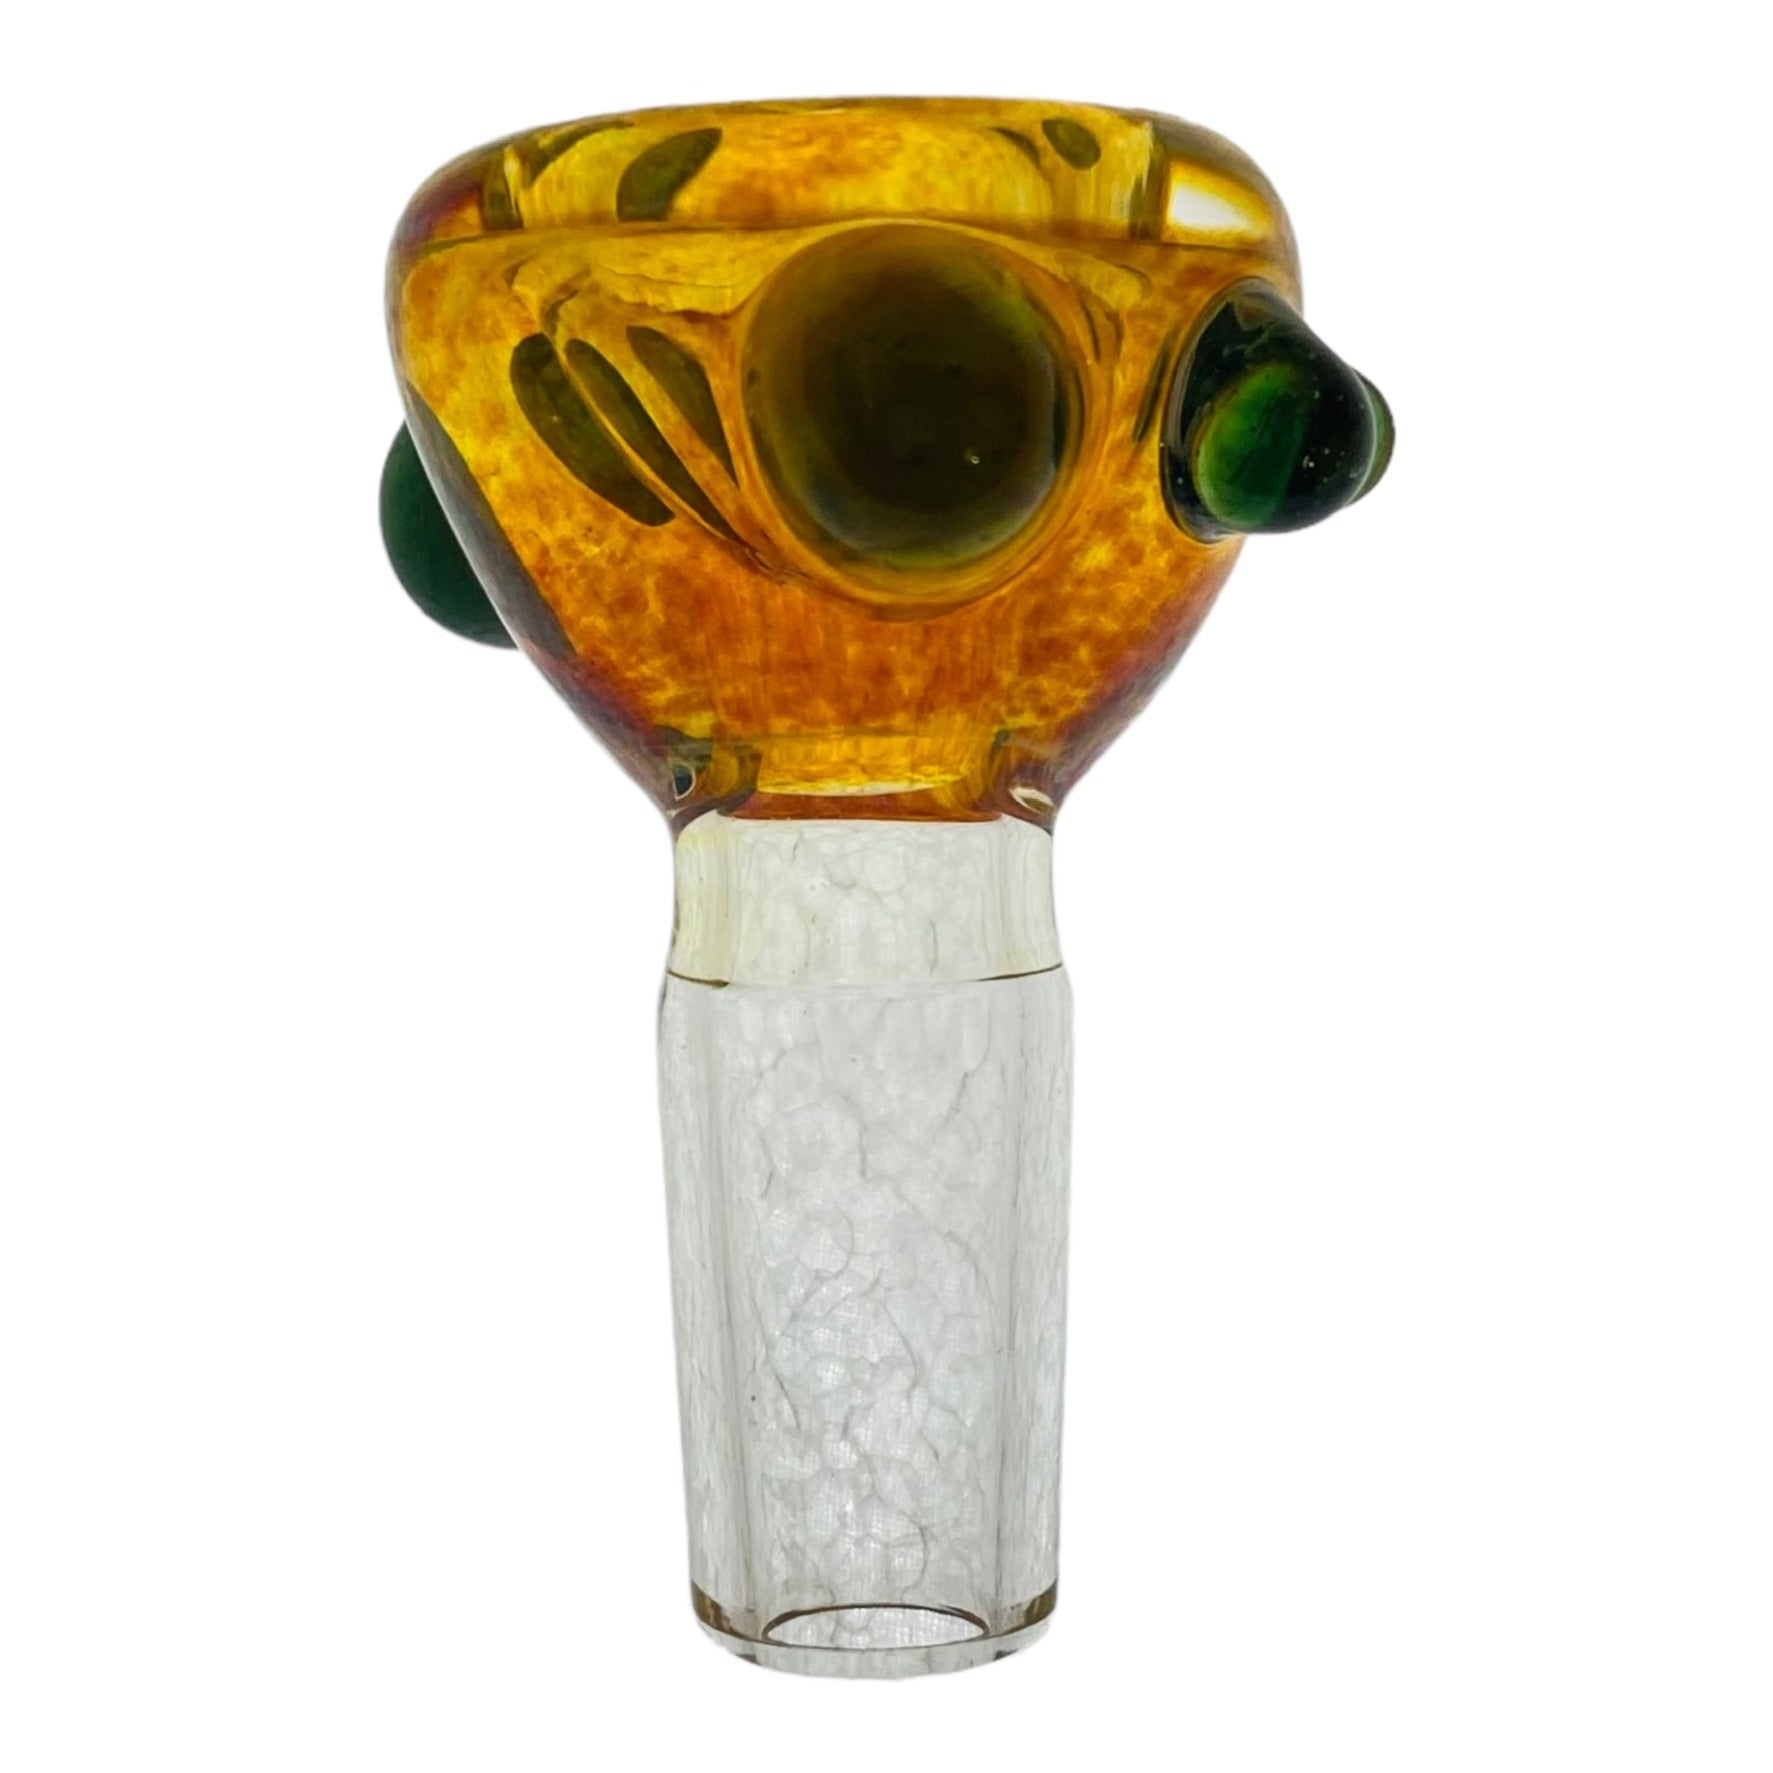 Arko Glass - 14mm Bowl Amber Frit Bubble With Green Dots